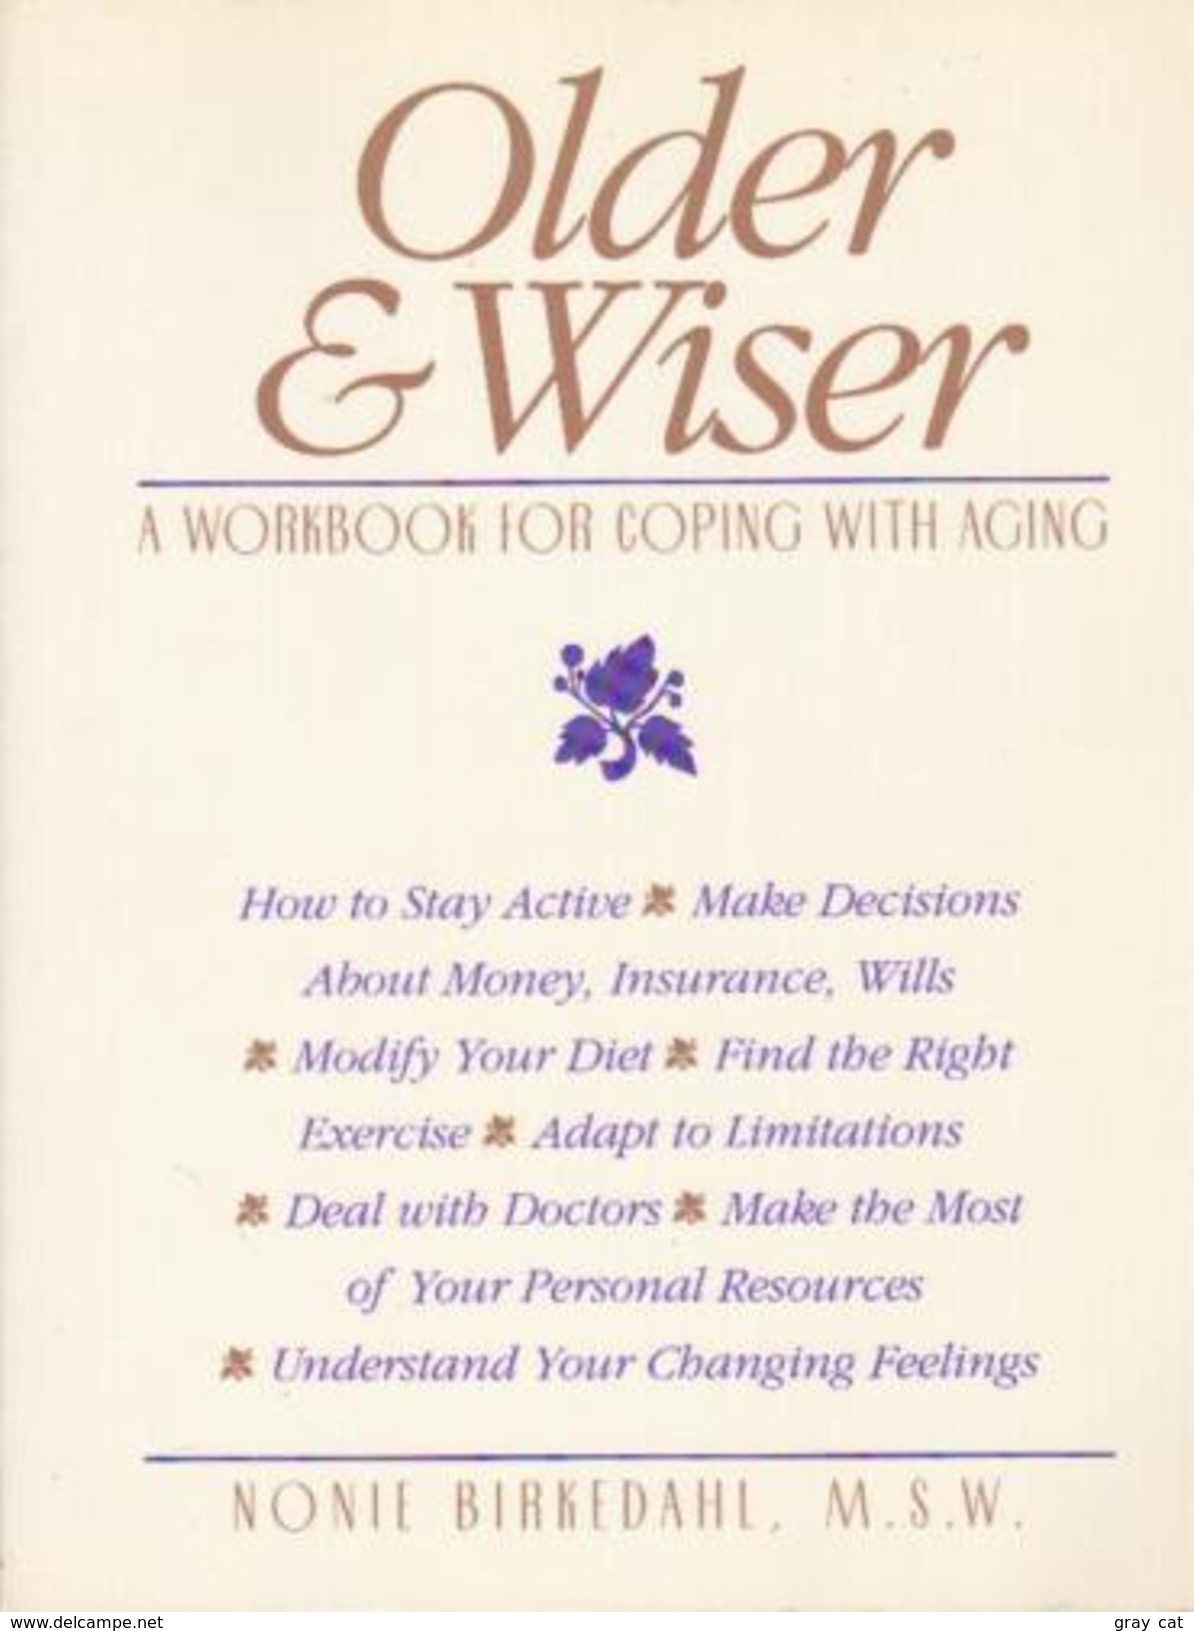 Older & Wiser: A Workbook For Coping With Aging By Nonie Birkedahl (ISBN 9781879237100) - Medical/ Nursing